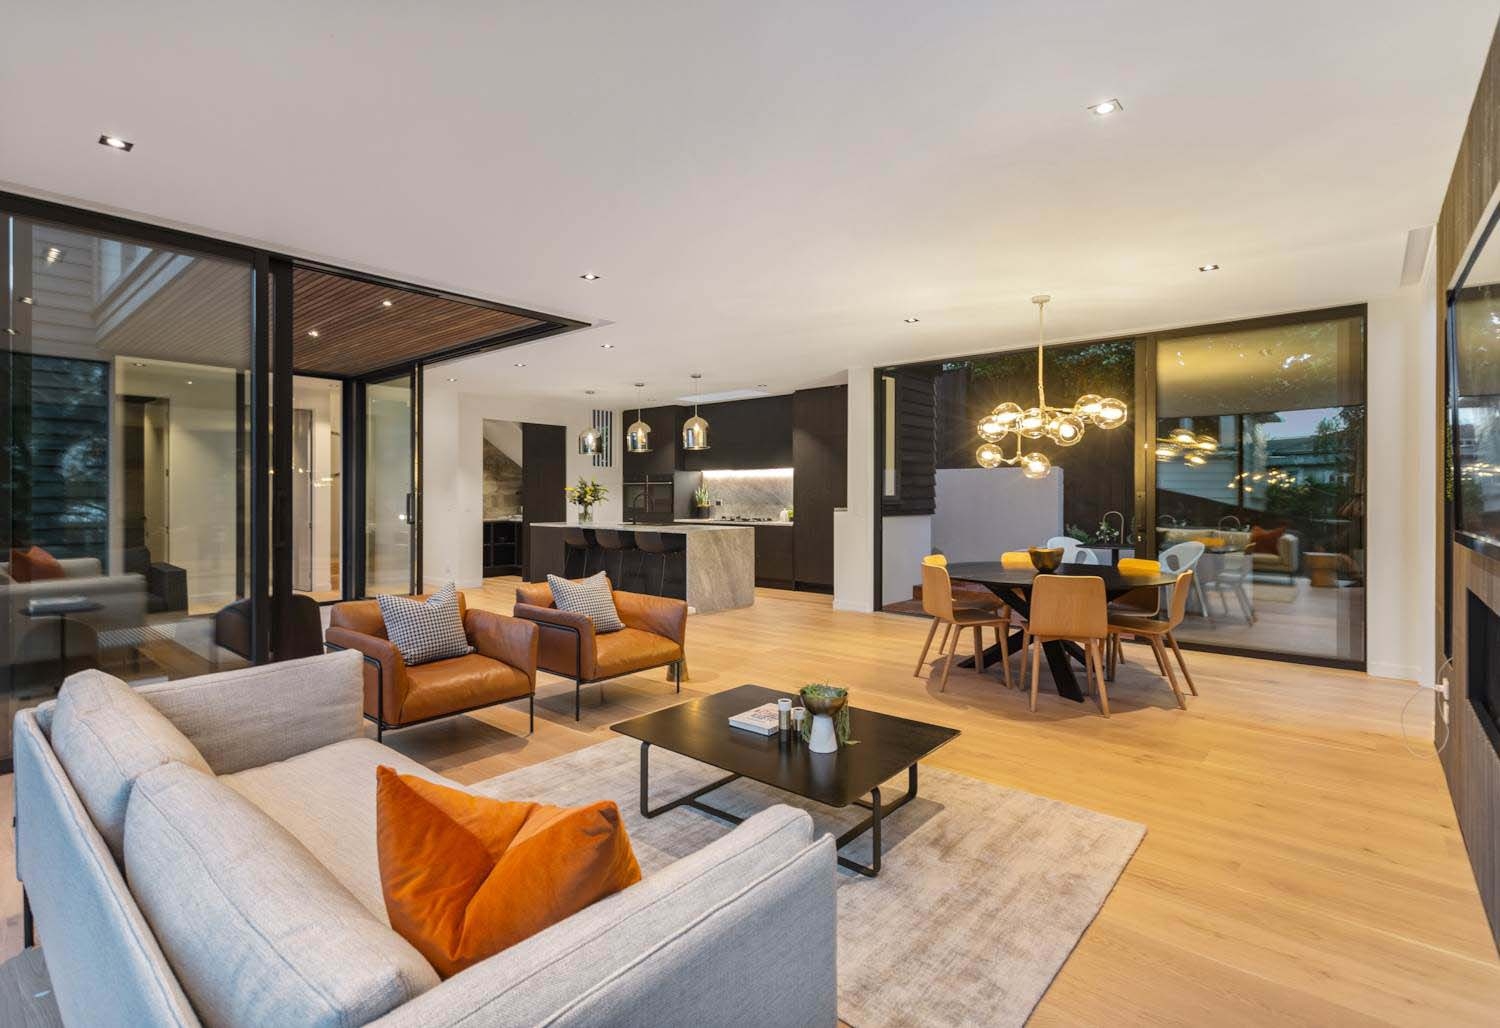 76 O'Neill St | Ponsonby - Interior Concepts